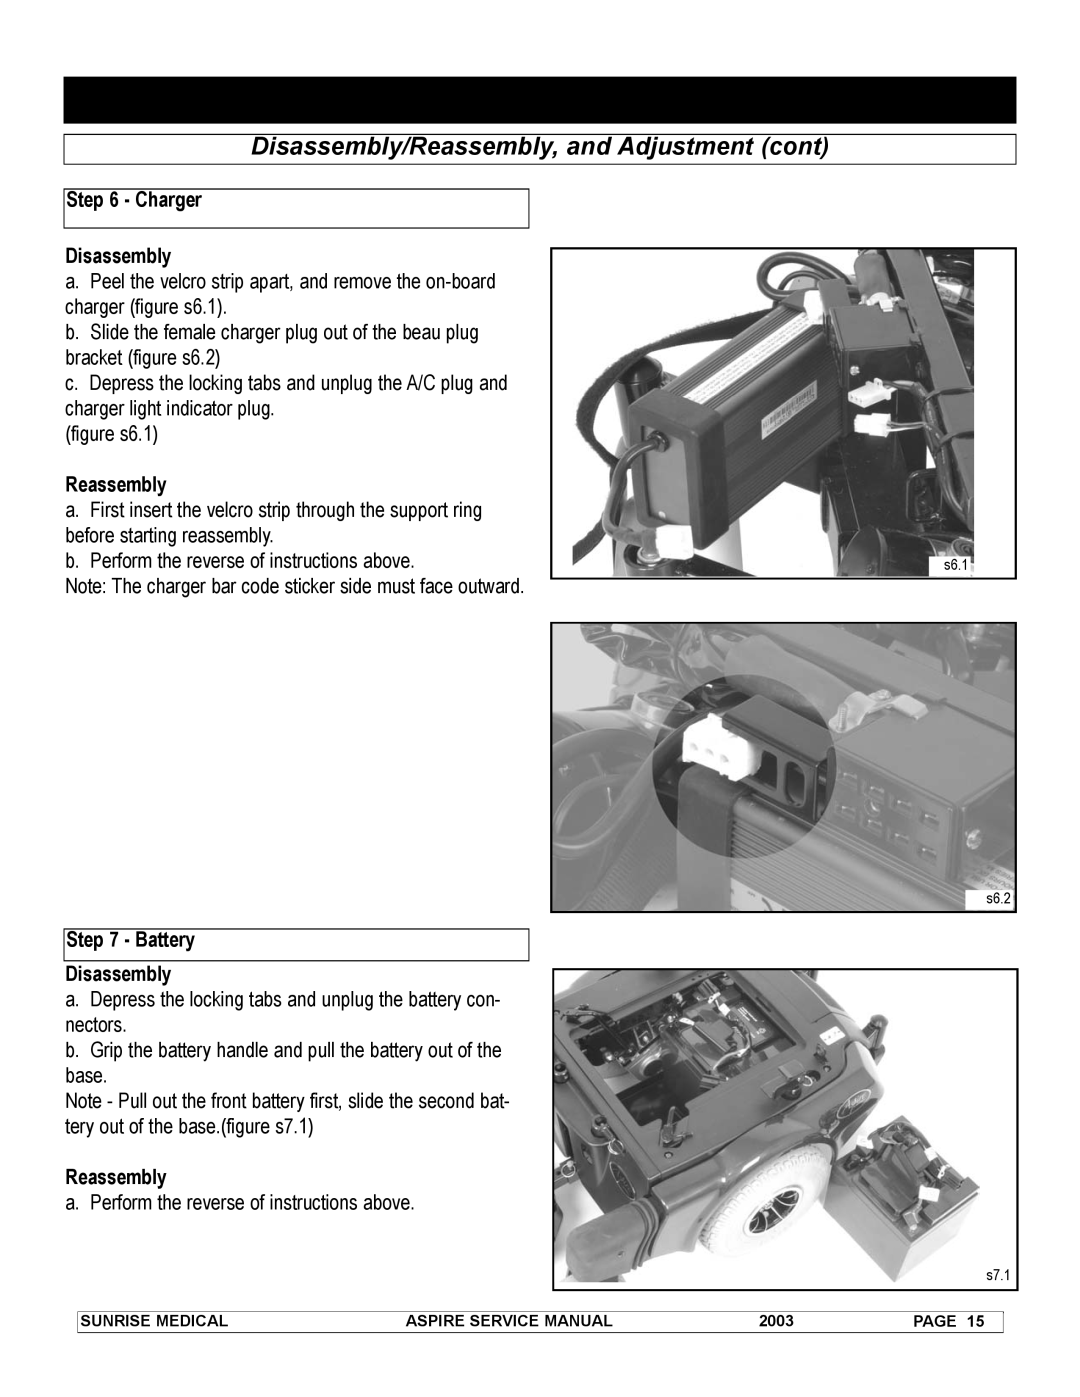 Sunrise Medical 931157 service manual Disassembly/Reassembly, and Adjustment cont, s6.1 s6.2 s7.1 